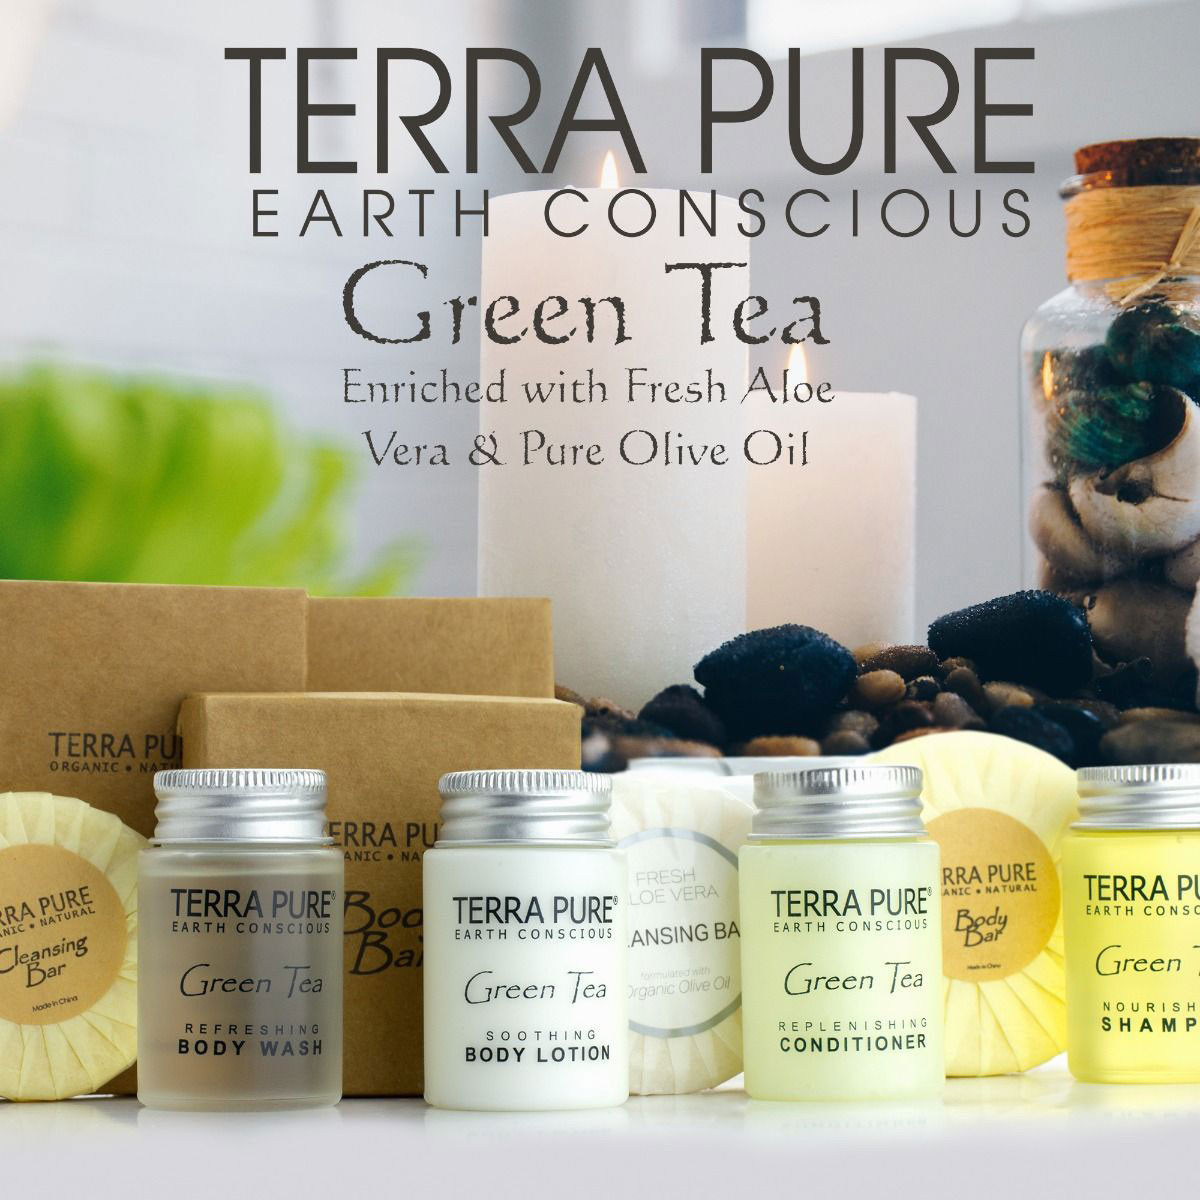 Has the TERRA PURE GREEN TEA Collection been tested on animals?